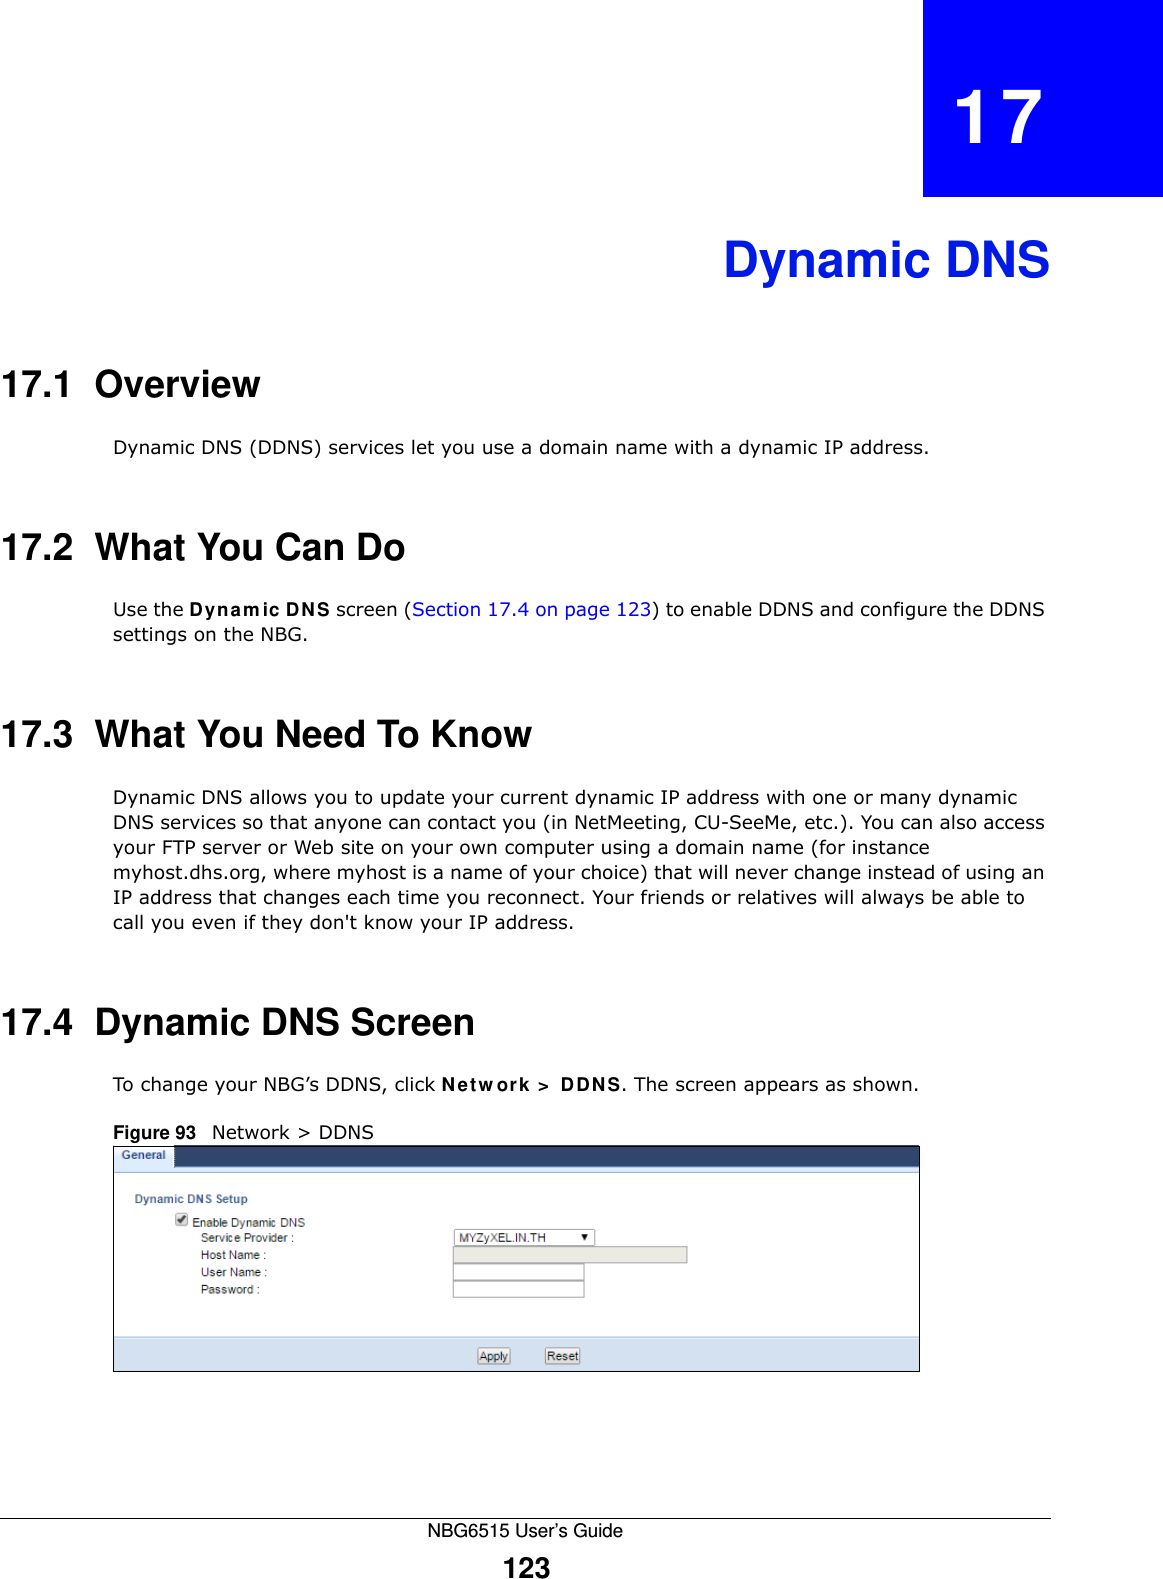 NBG6515 User’s Guide123CHAPTER   17Dynamic DNS17.1  Overview Dynamic DNS (DDNS) services let you use a domain name with a dynamic IP address.17.2  What You Can DoUse the Dynamic DNS screen (Section 17.4 on page 123) to enable DDNS and configure the DDNS settings on the NBG.17.3  What You Need To KnowDynamic DNS allows you to update your current dynamic IP address with one or many dynamic DNS services so that anyone can contact you (in NetMeeting, CU-SeeMe, etc.). You can also access your FTP server or Web site on your own computer using a domain name (for instance myhost.dhs.org, where myhost is a name of your choice) that will never change instead of using an IP address that changes each time you reconnect. Your friends or relatives will always be able to call you even if they don&apos;t know your IP address.17.4  Dynamic DNS Screen   To change your NBG’s DDNS, click Network &gt; DDNS. The screen appears as shown.Figure 93   Network &gt; DDNS